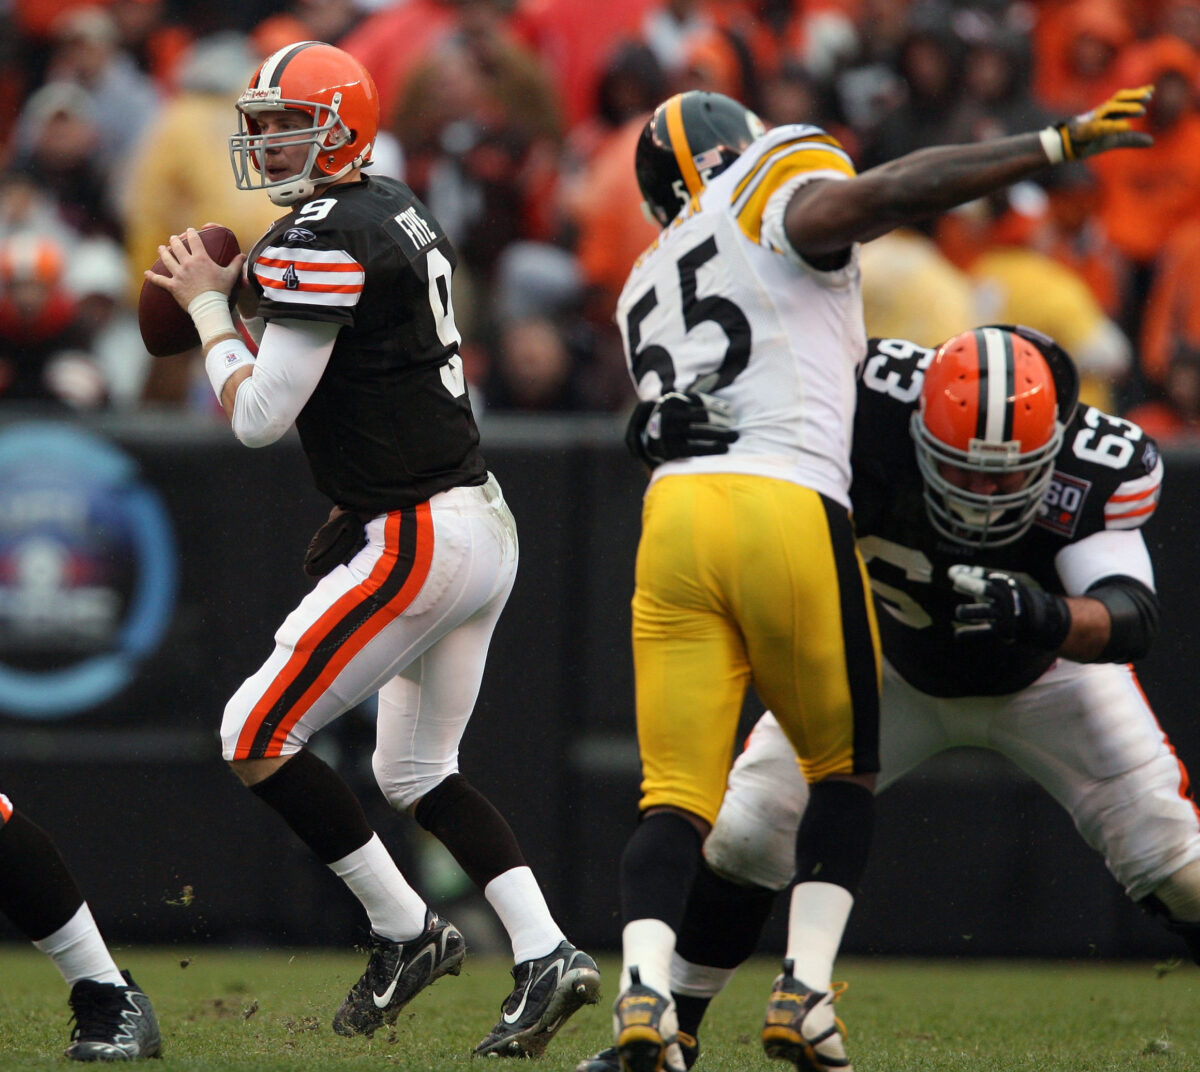 63 days until Browns season opener: 5 players to wear 63 in Cleveland